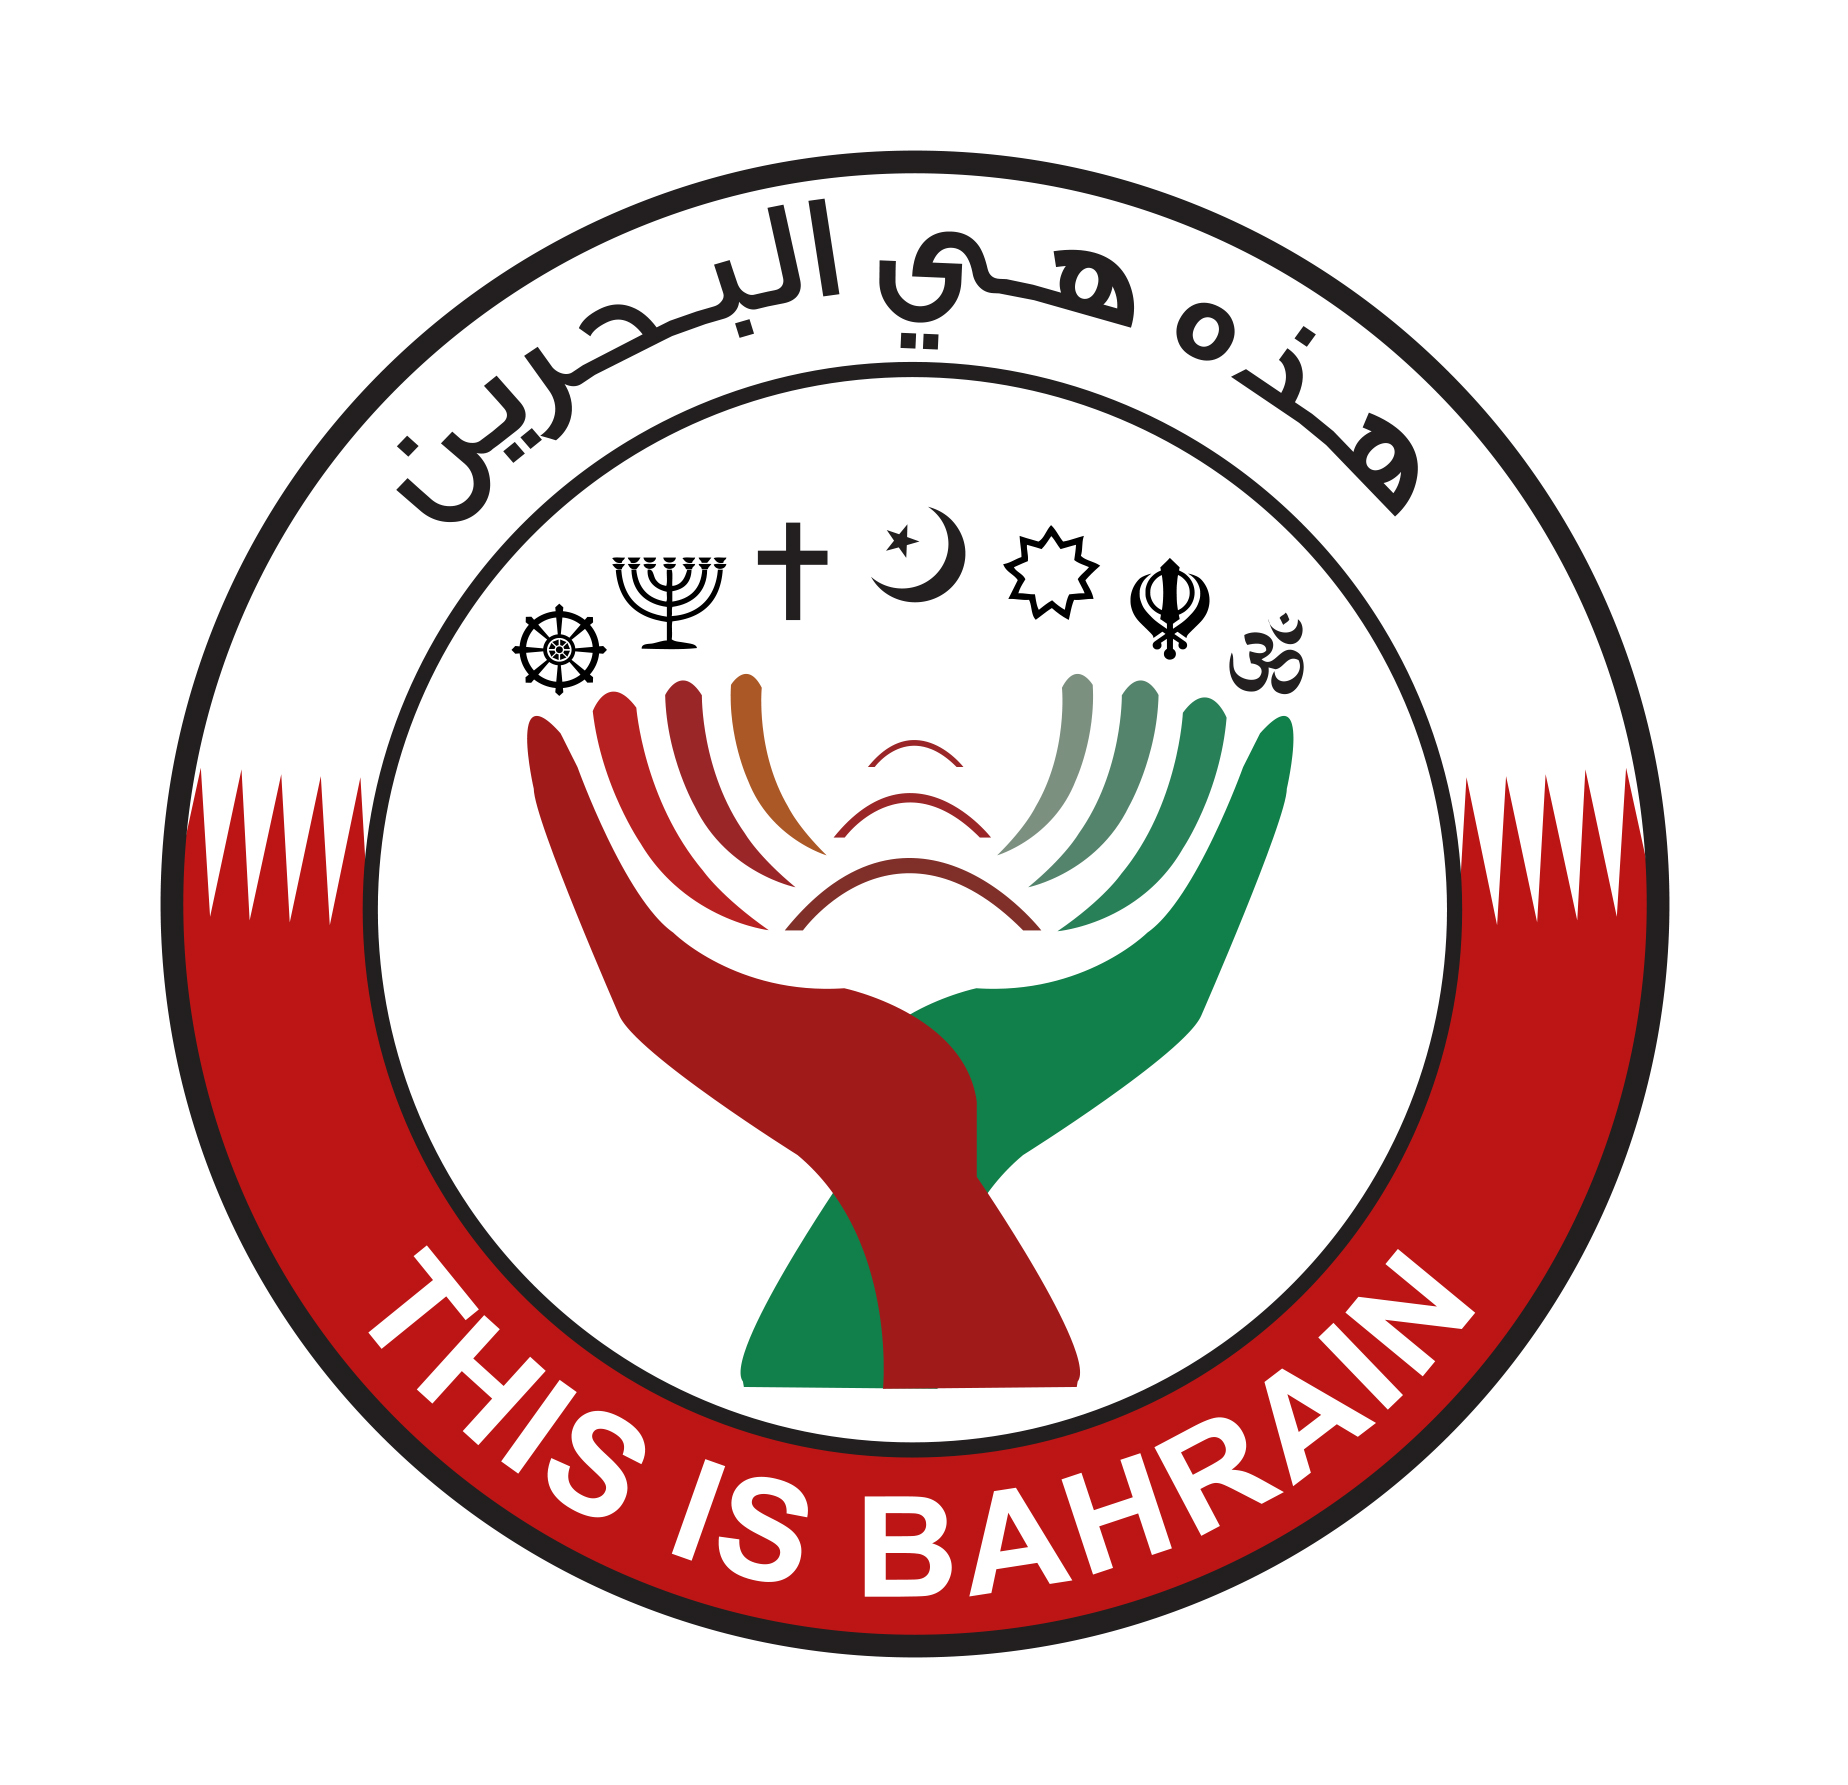 THIS IS BAHRAIN